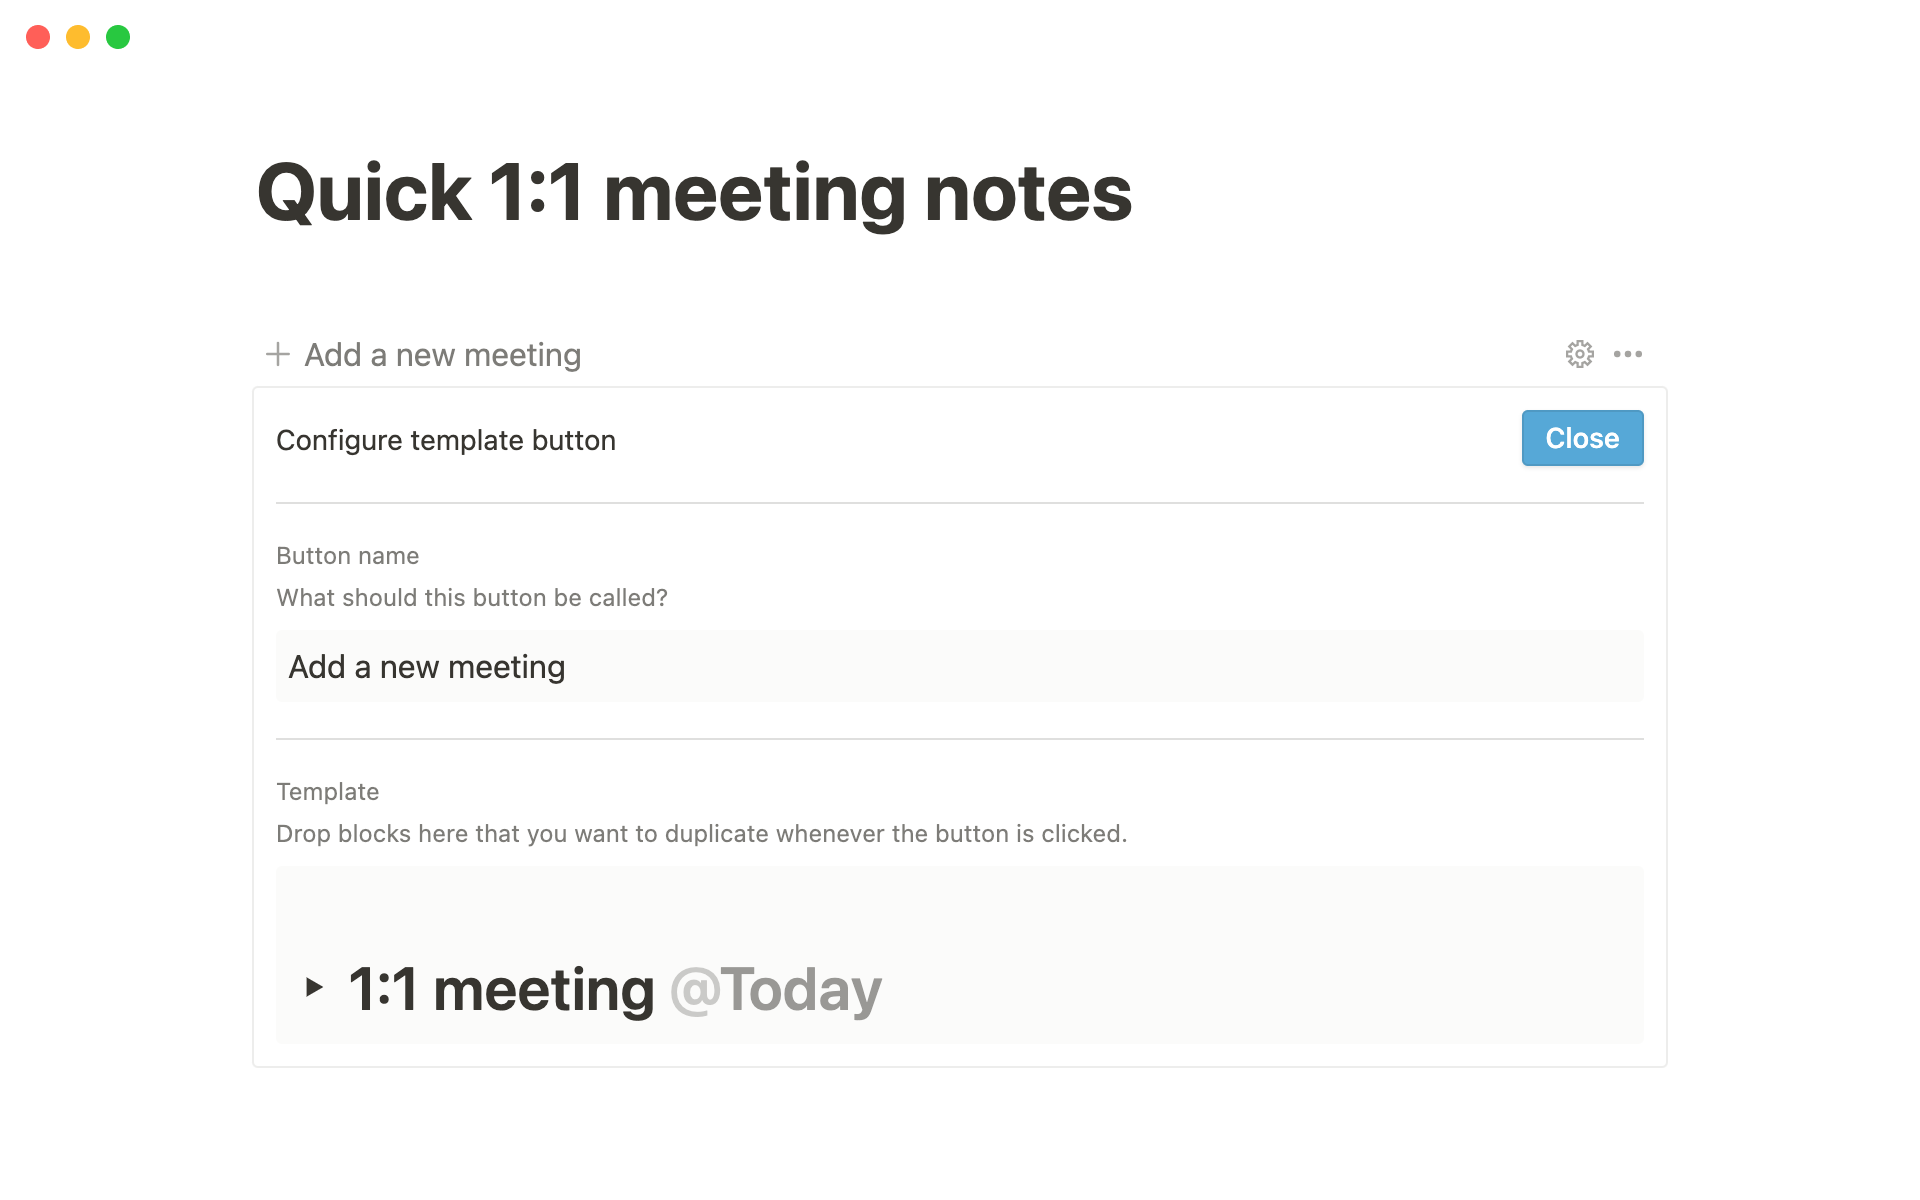 Quickly keep track of your talking points, notes, and action items for all one on one meetings.